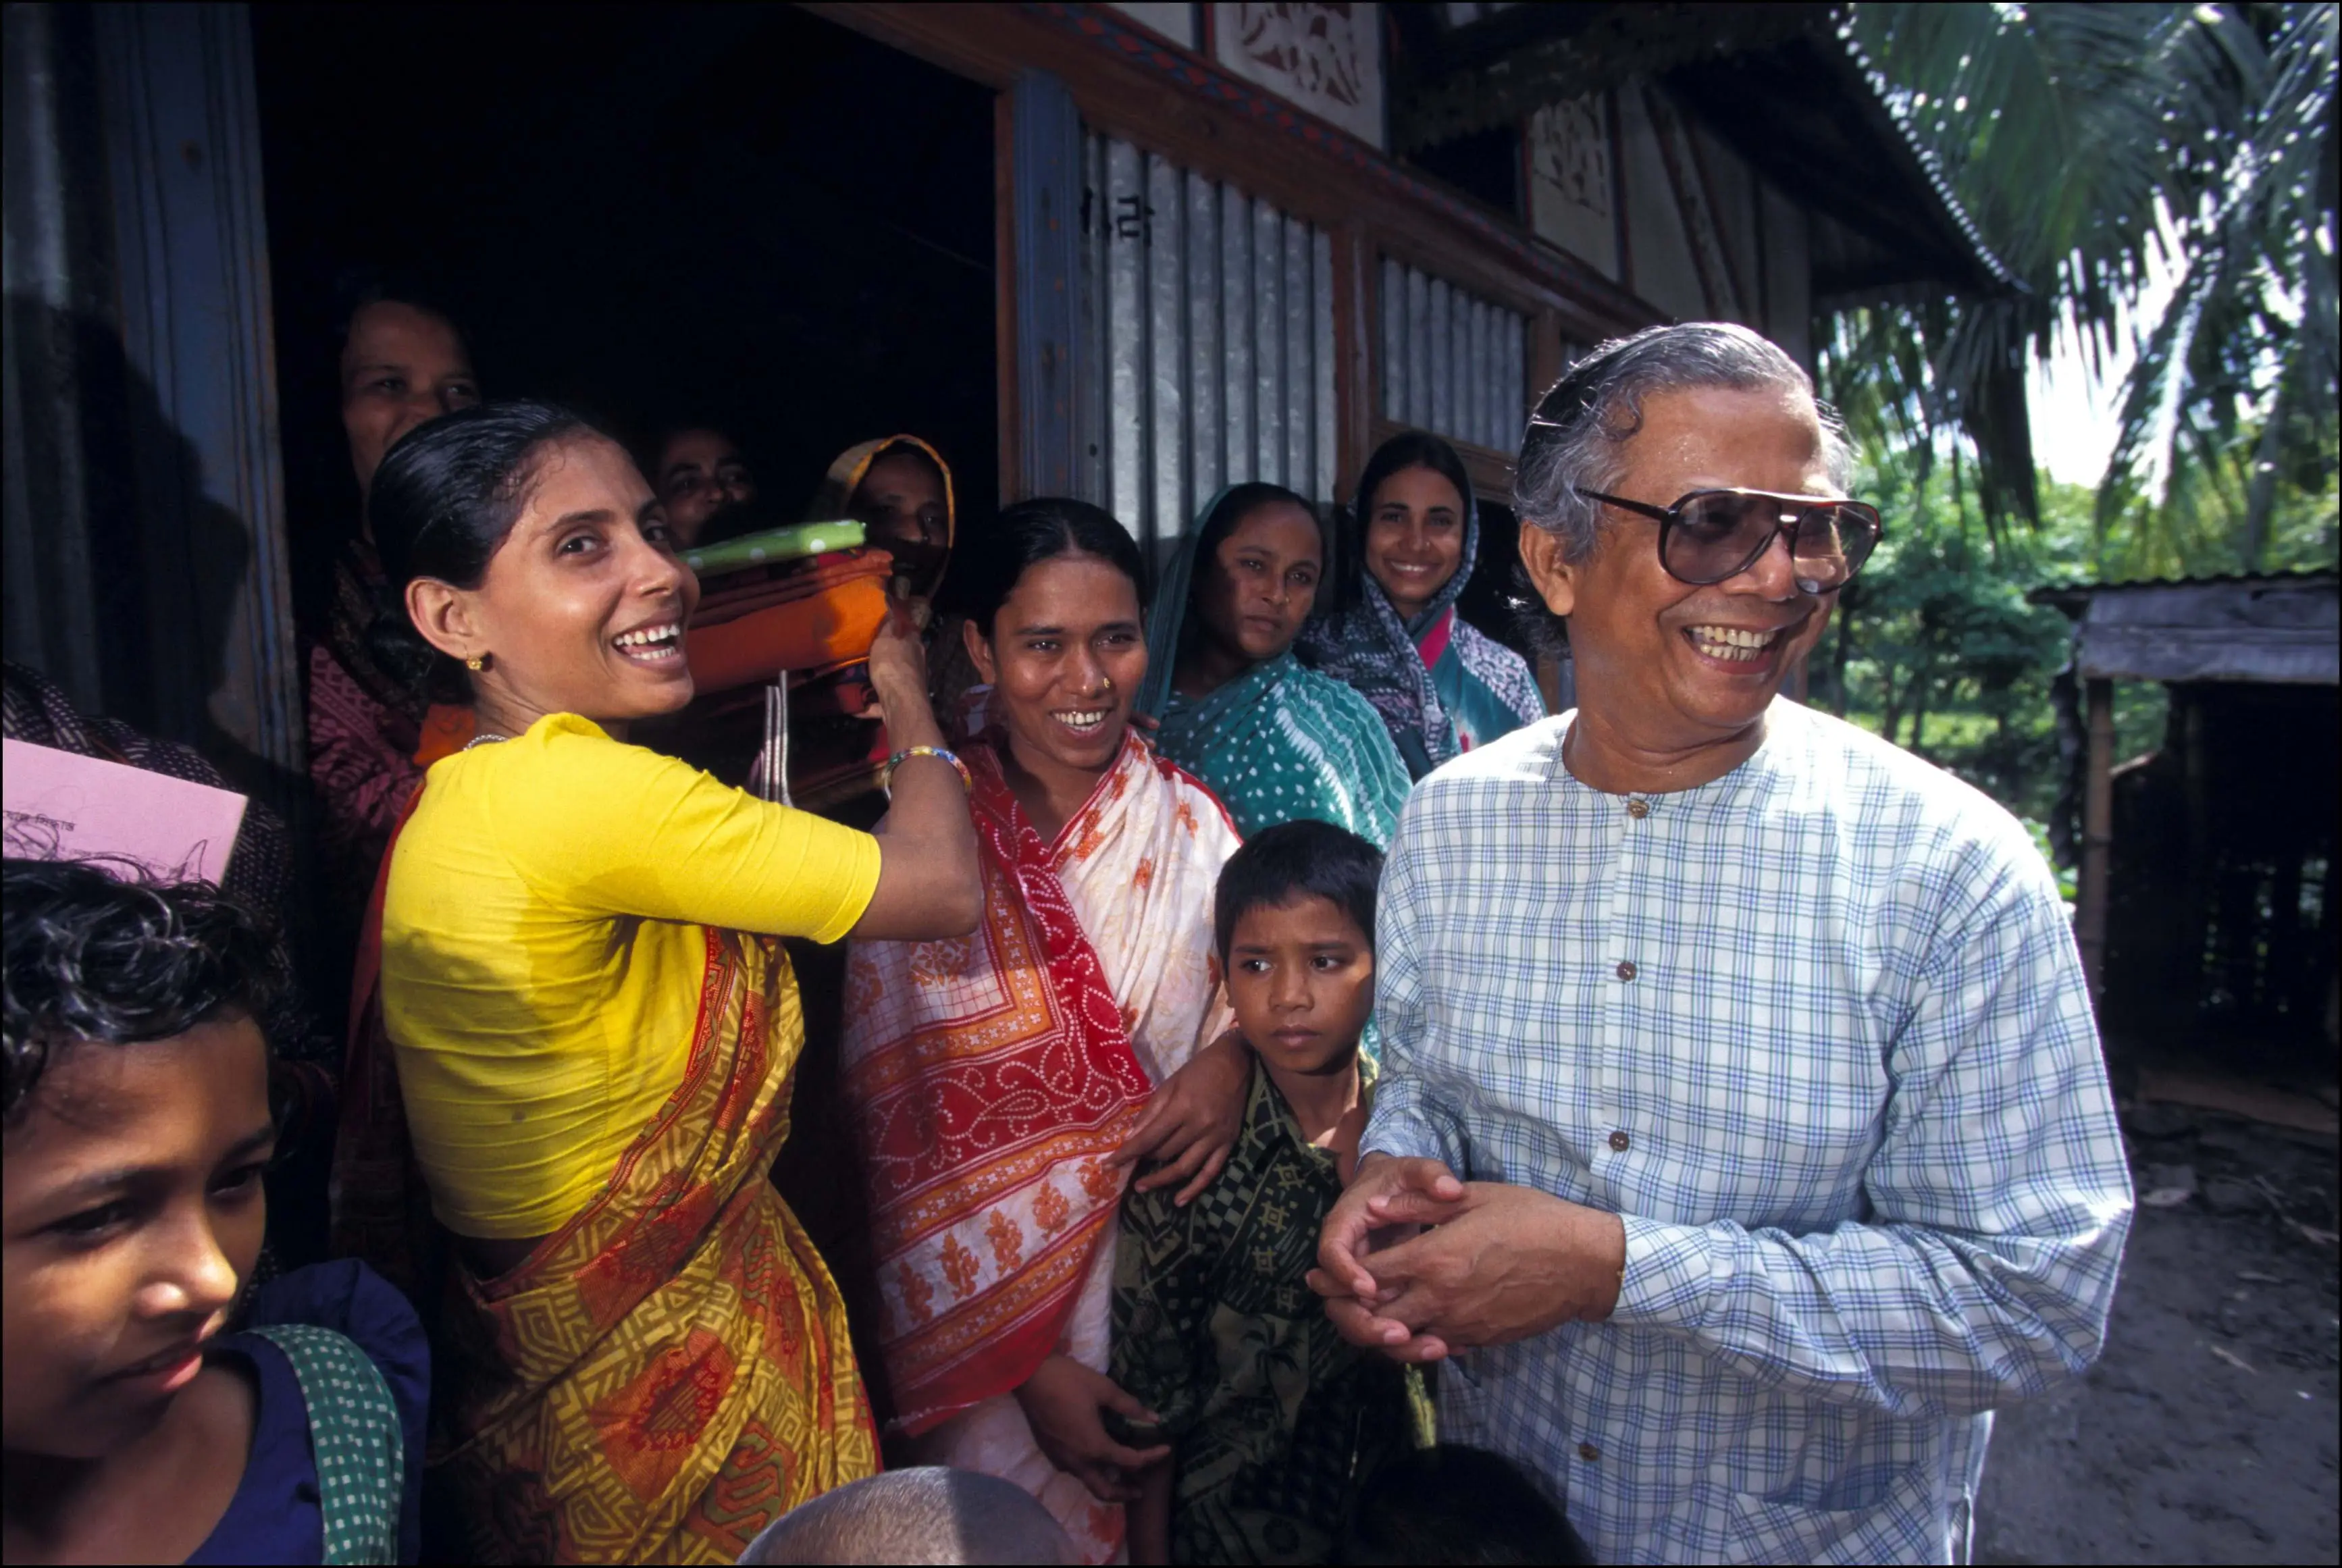 Muhammad Yunus laughs with Bangladeshi women and their families.